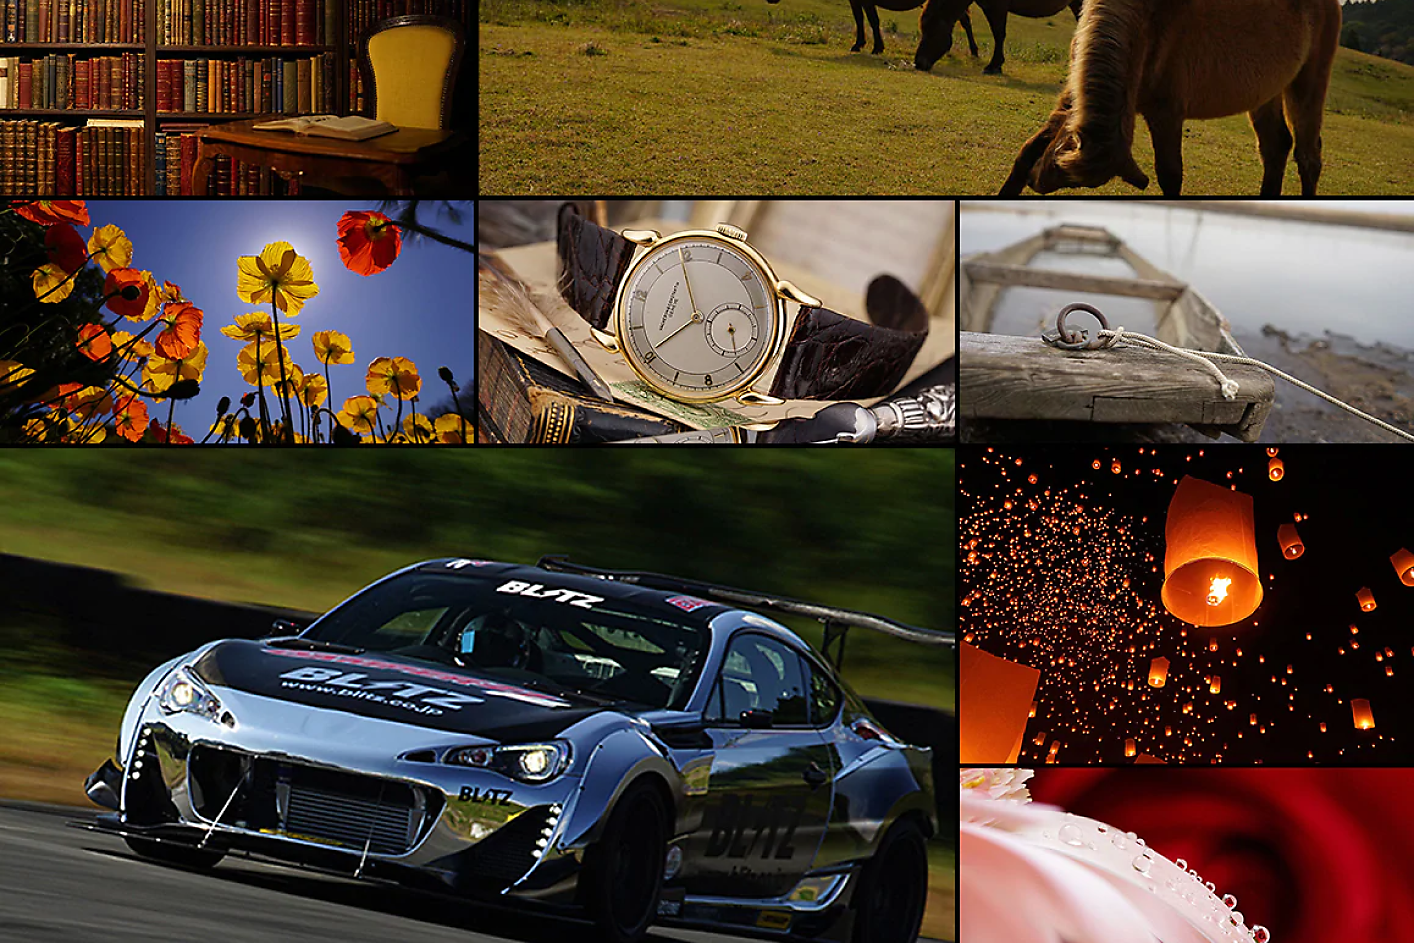 Colourful collage of eight images, including a racecar, horse, watch and flowers